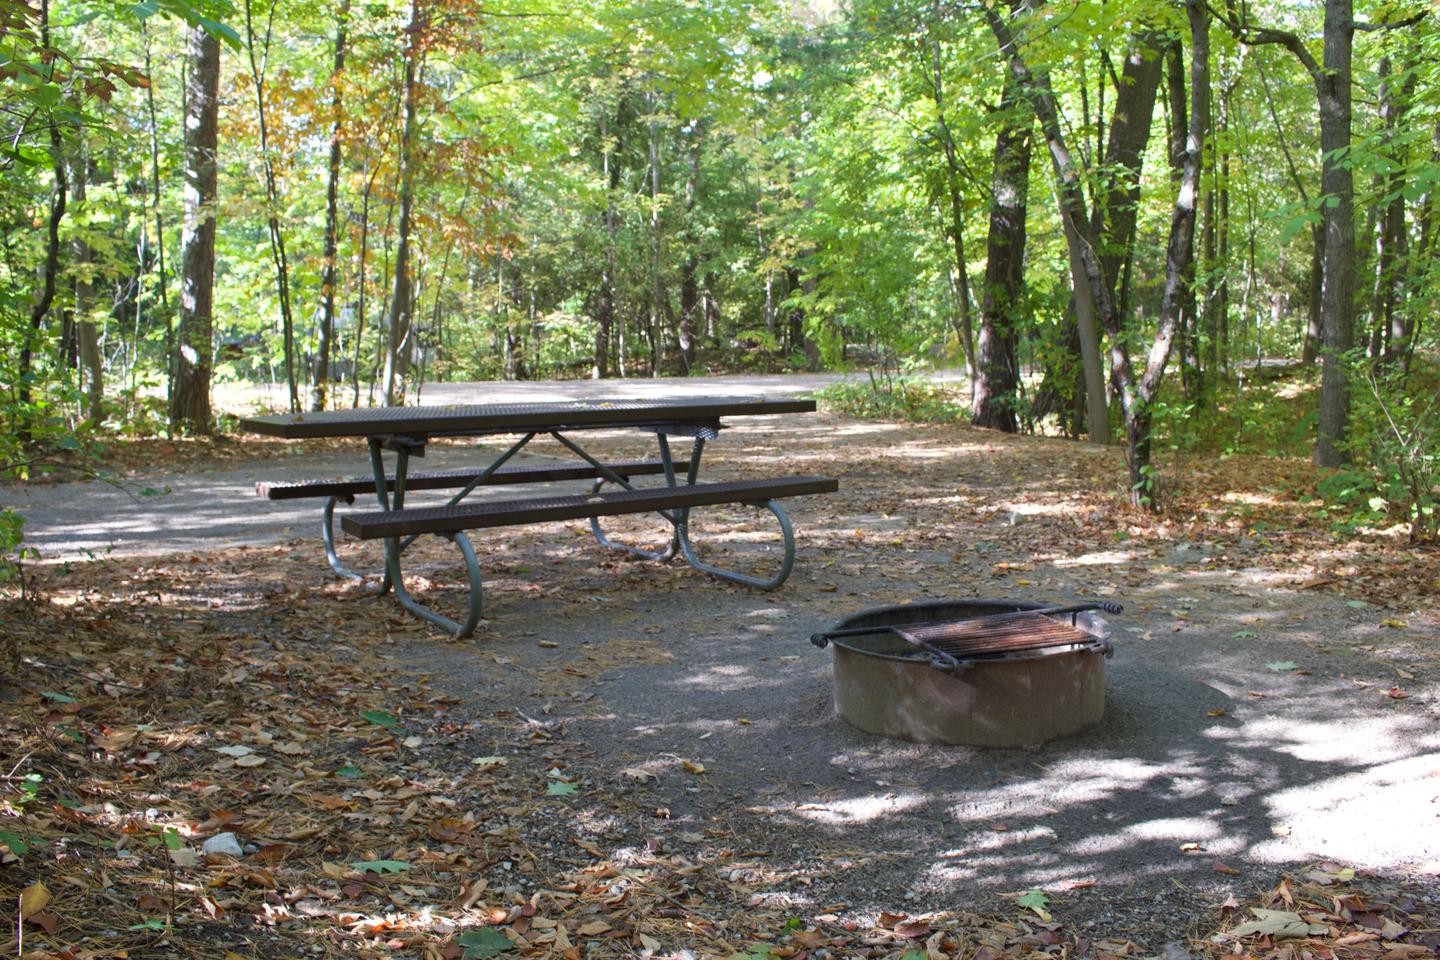 Campsite #67, view from the site toward the text space